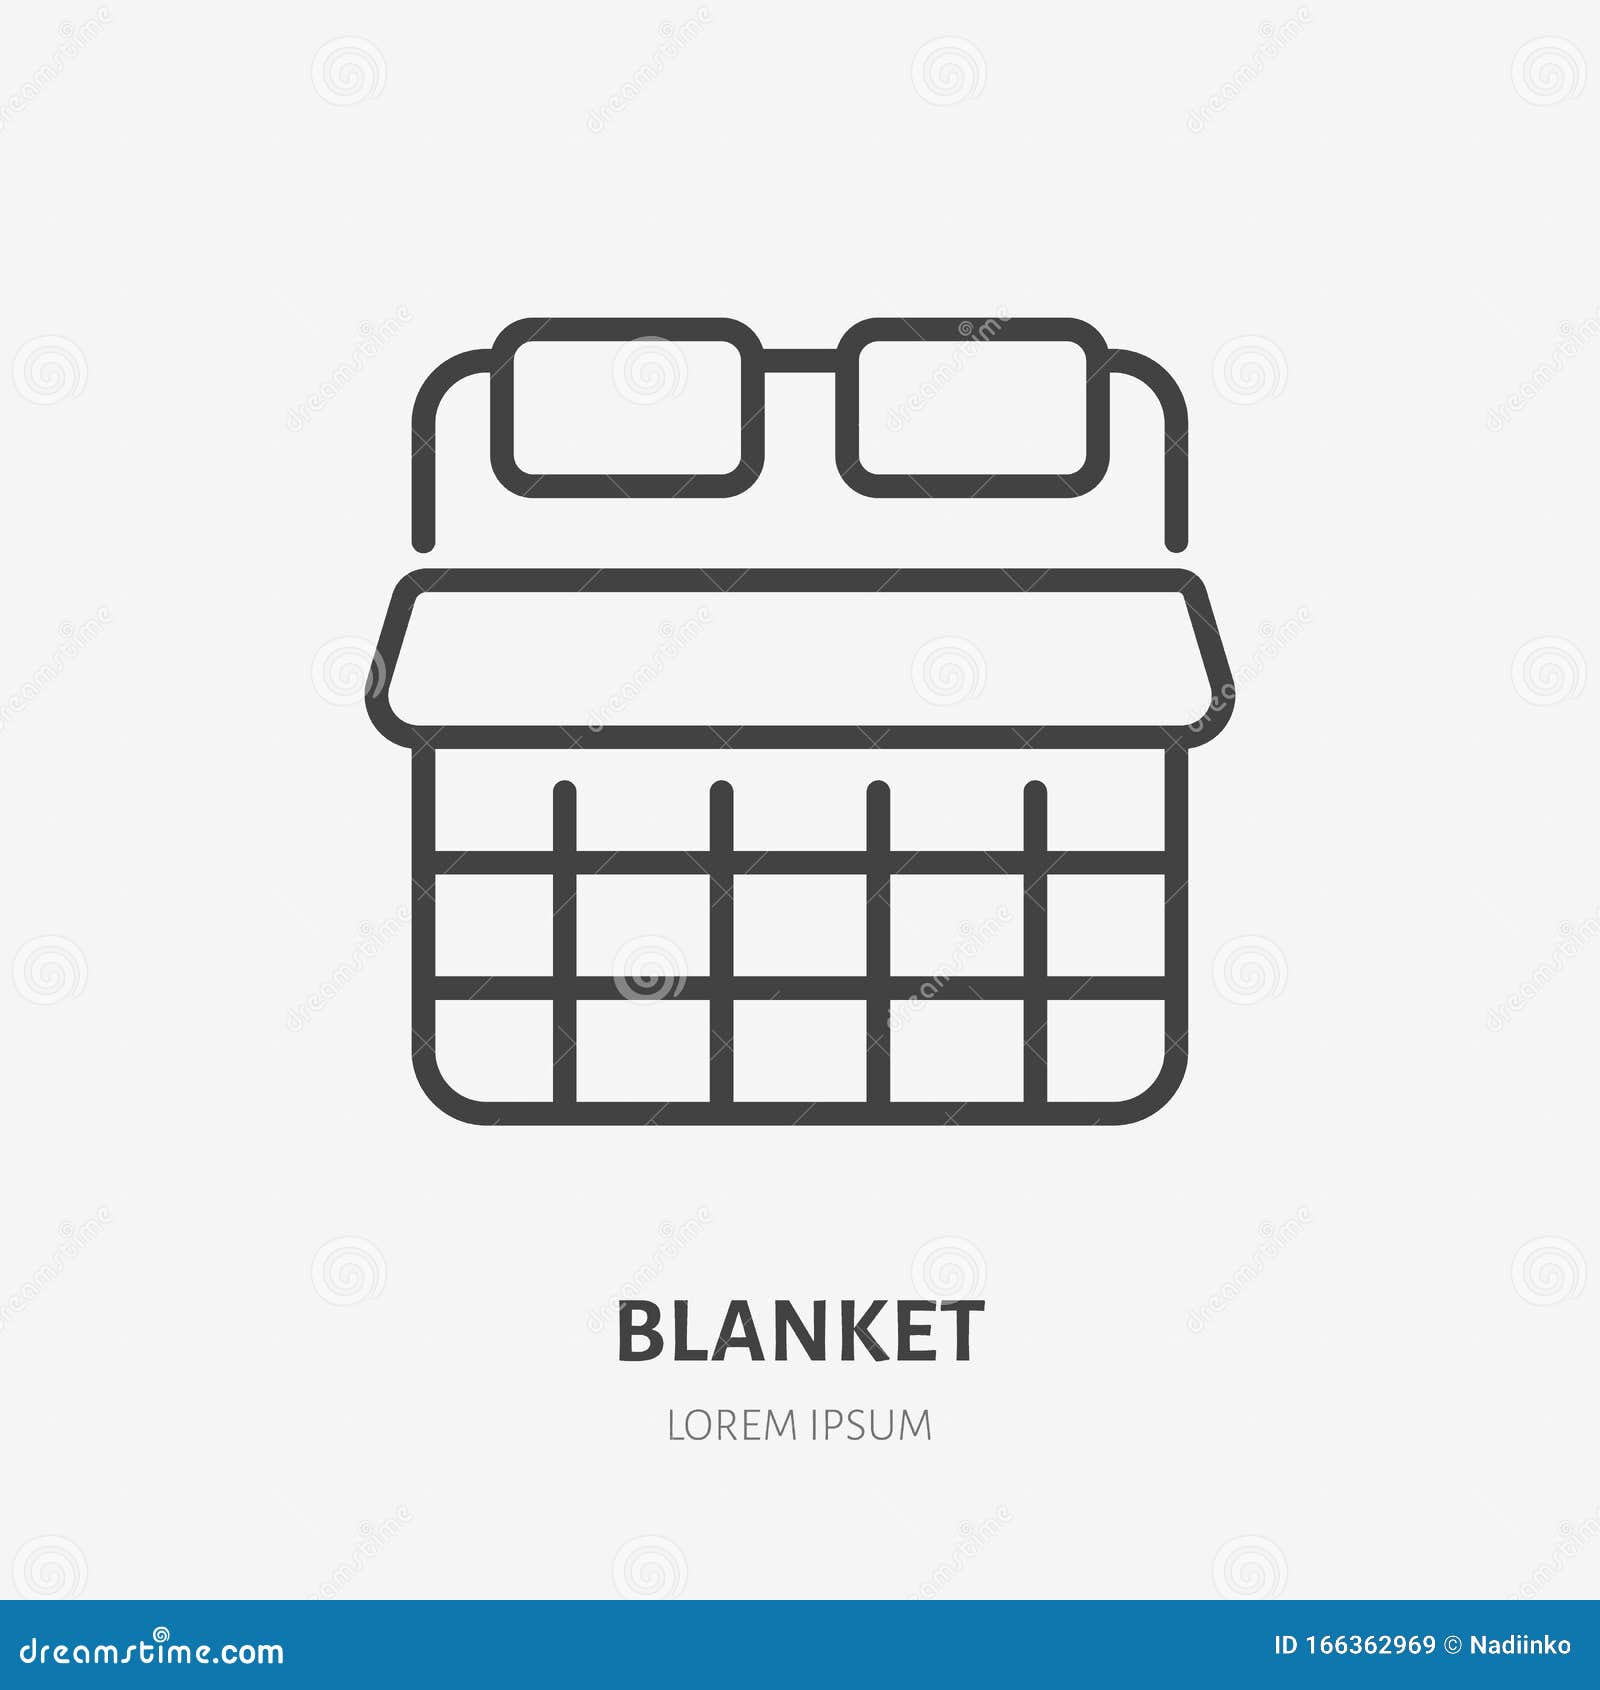 Blanket Line Icon Vector Pictogram Of Soft Duvet Bed Linen Interior Illustration Home Textile Sign Stock Vector Illustration Of Template Throw 166362969